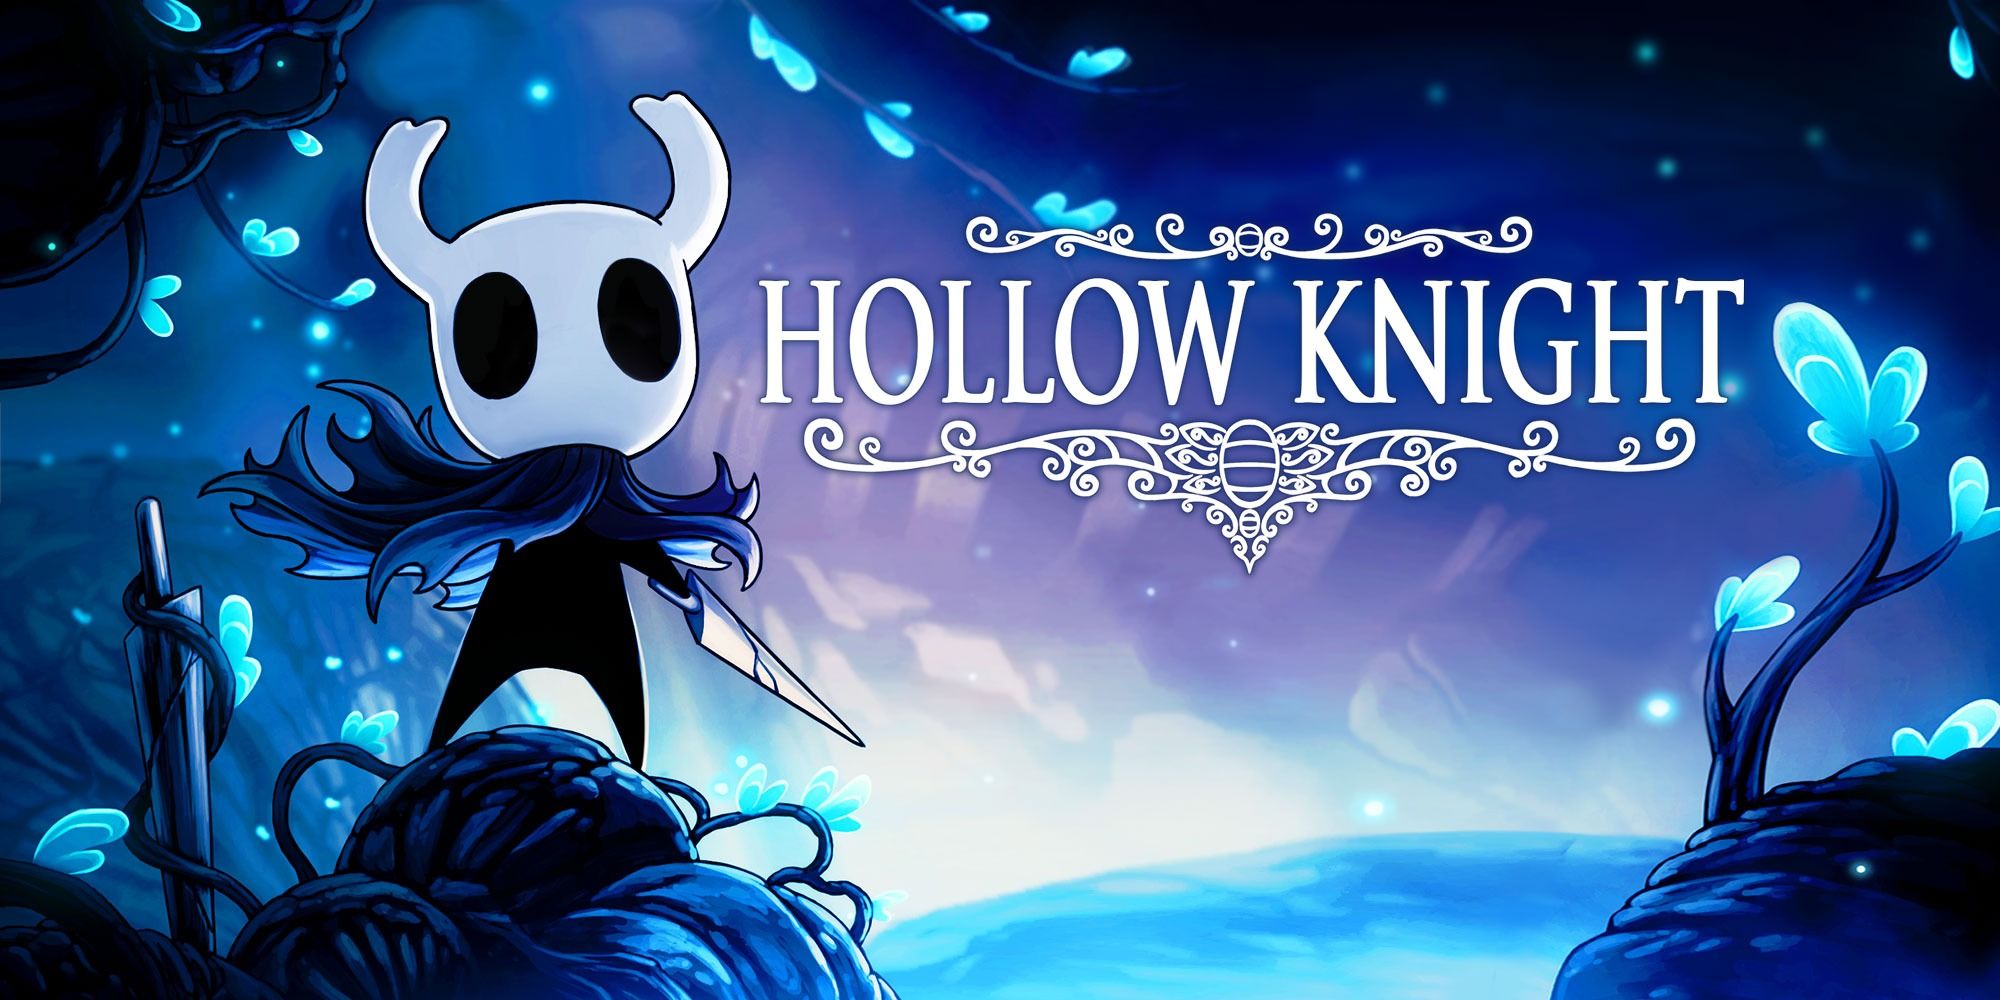 Hollow Knight bug knight with needle